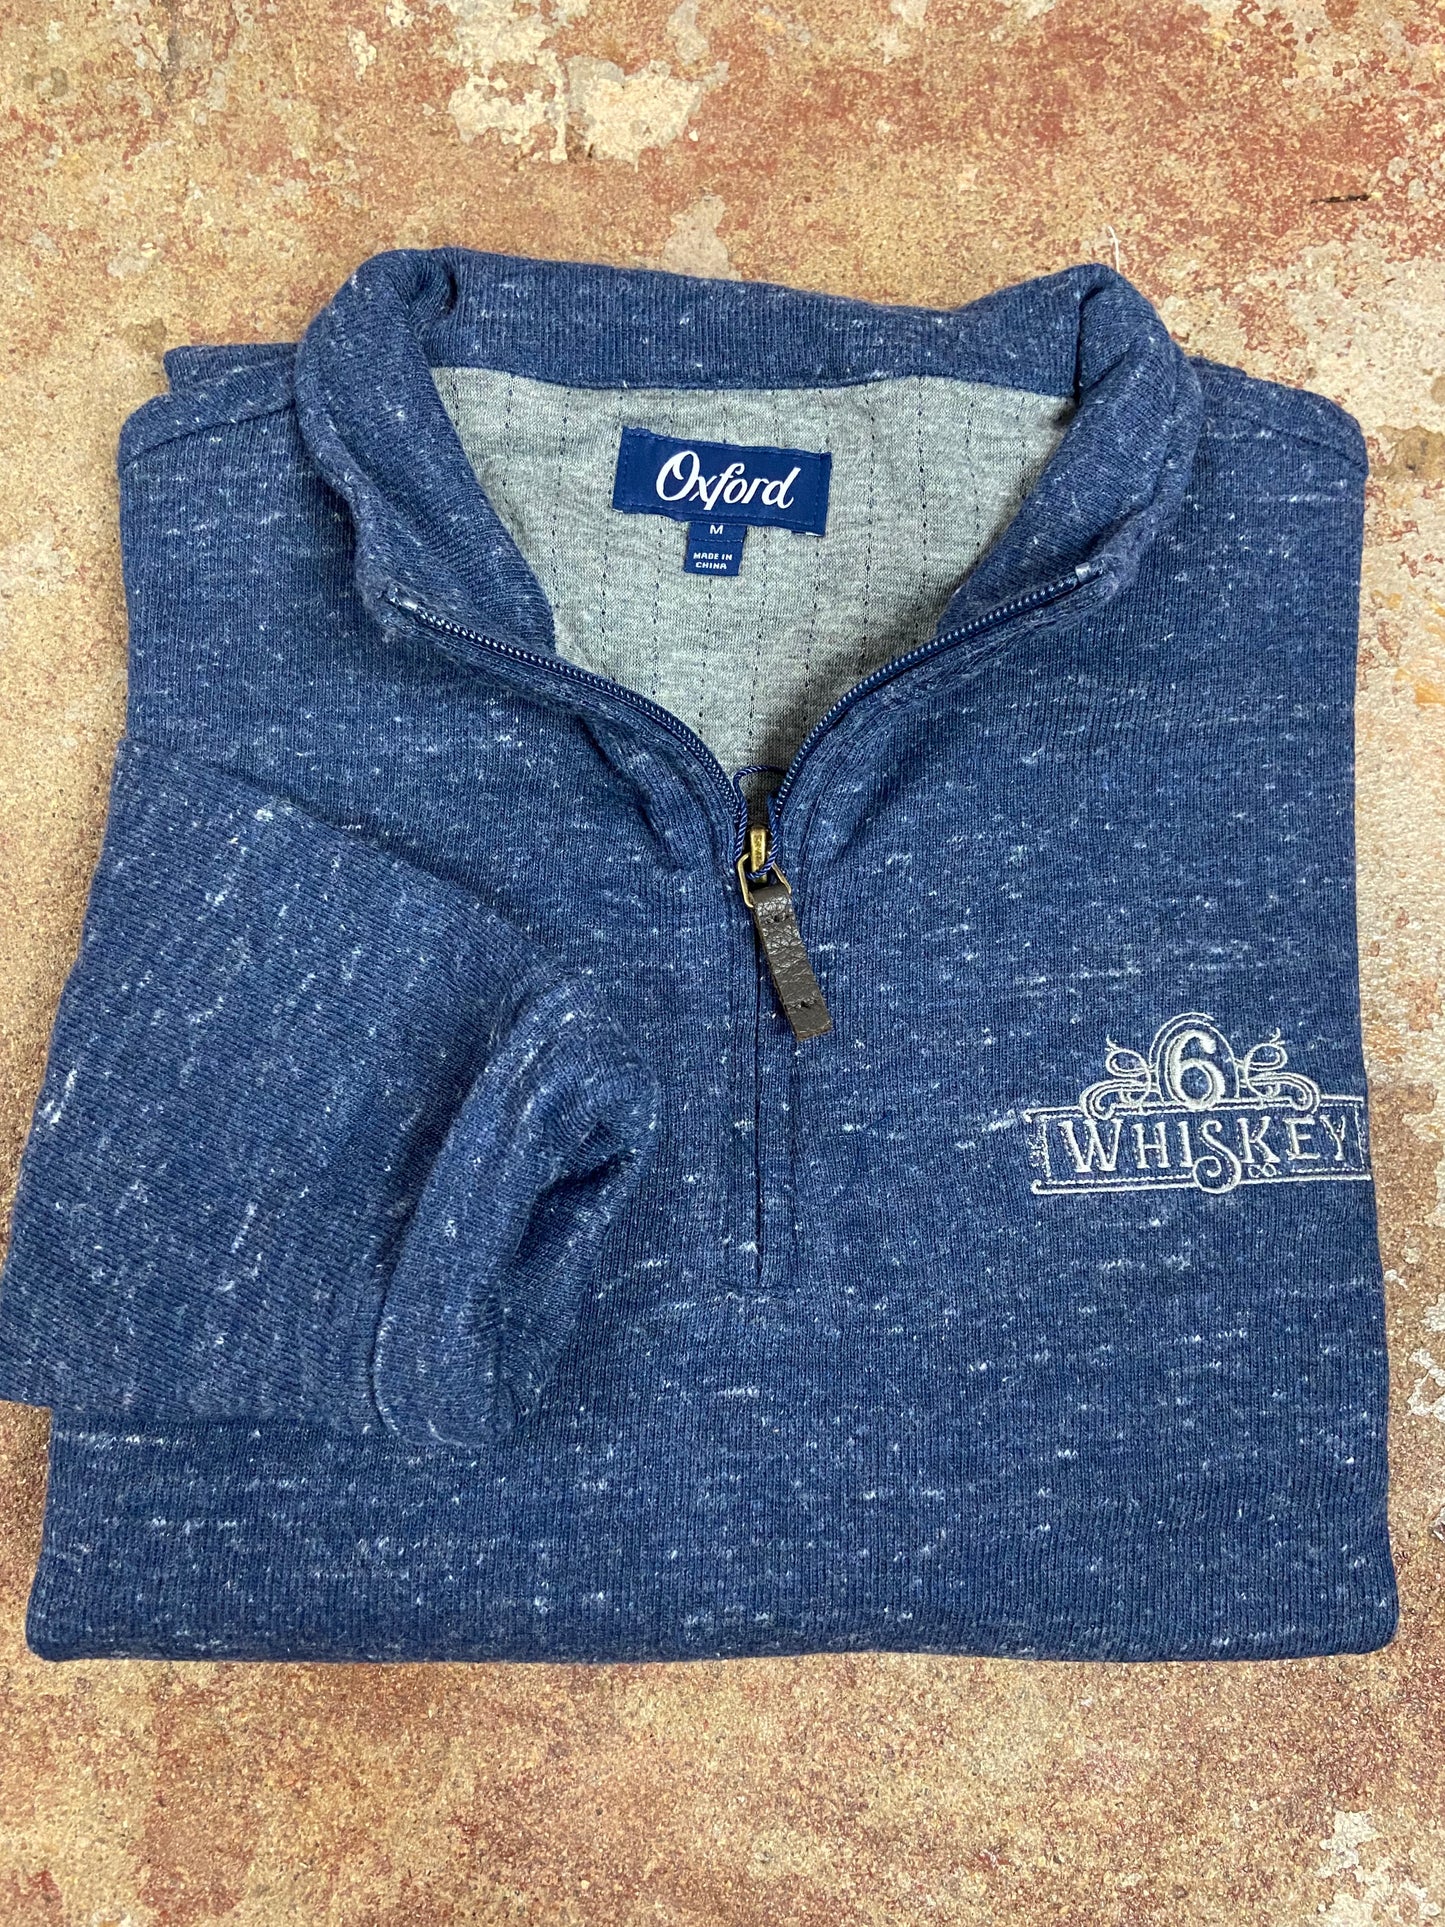 Load image into Gallery viewer, Oxford Crawford 1/4 Zip Fleece Pullover 6Whiskey Fall 2020 In Indigo Blue Heather 
